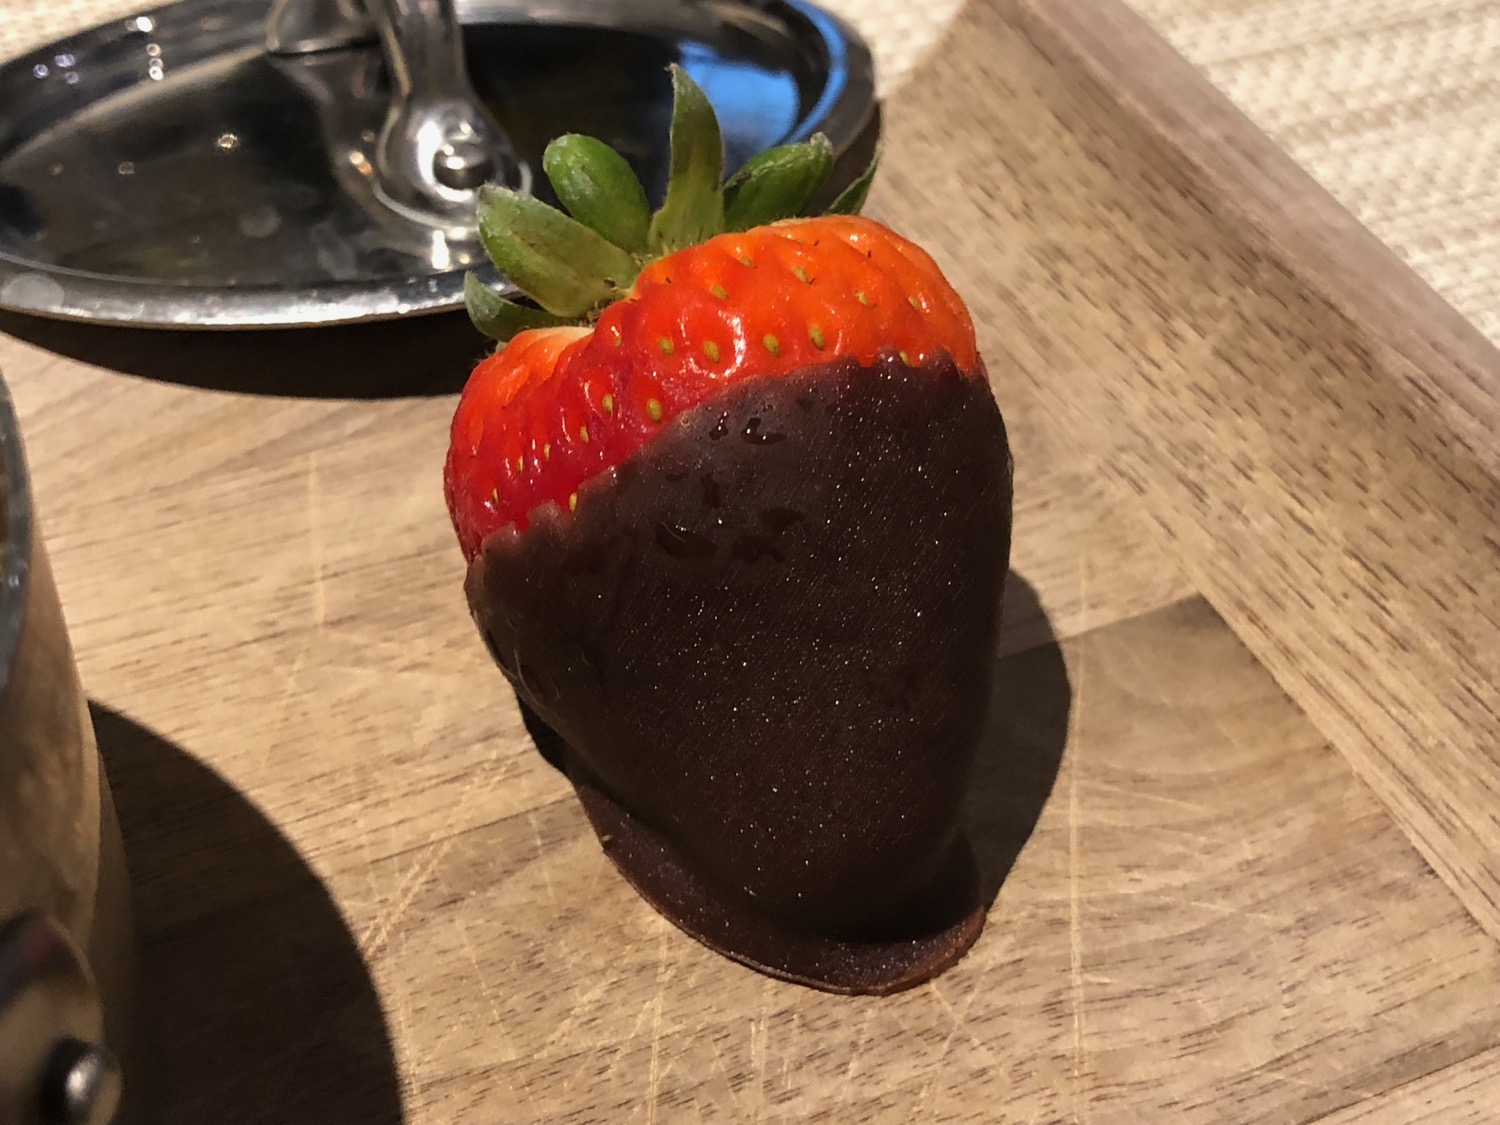 a chocolate covered strawberry on a wooden surface